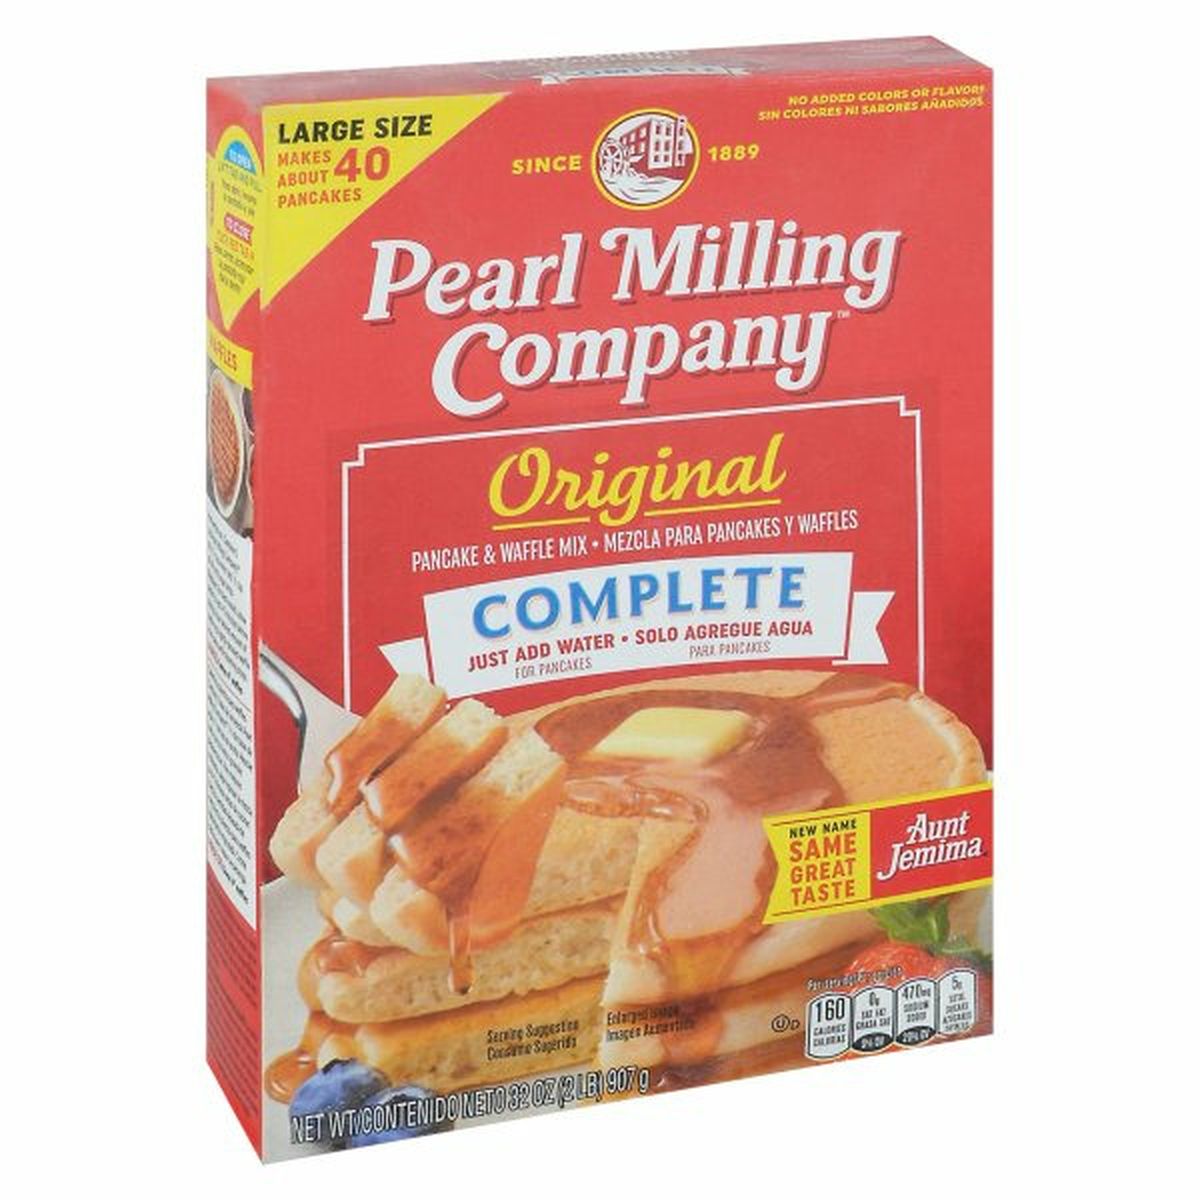 Calories in Pearl Milling Company Pancake & Waffle Mix, Original, Complete